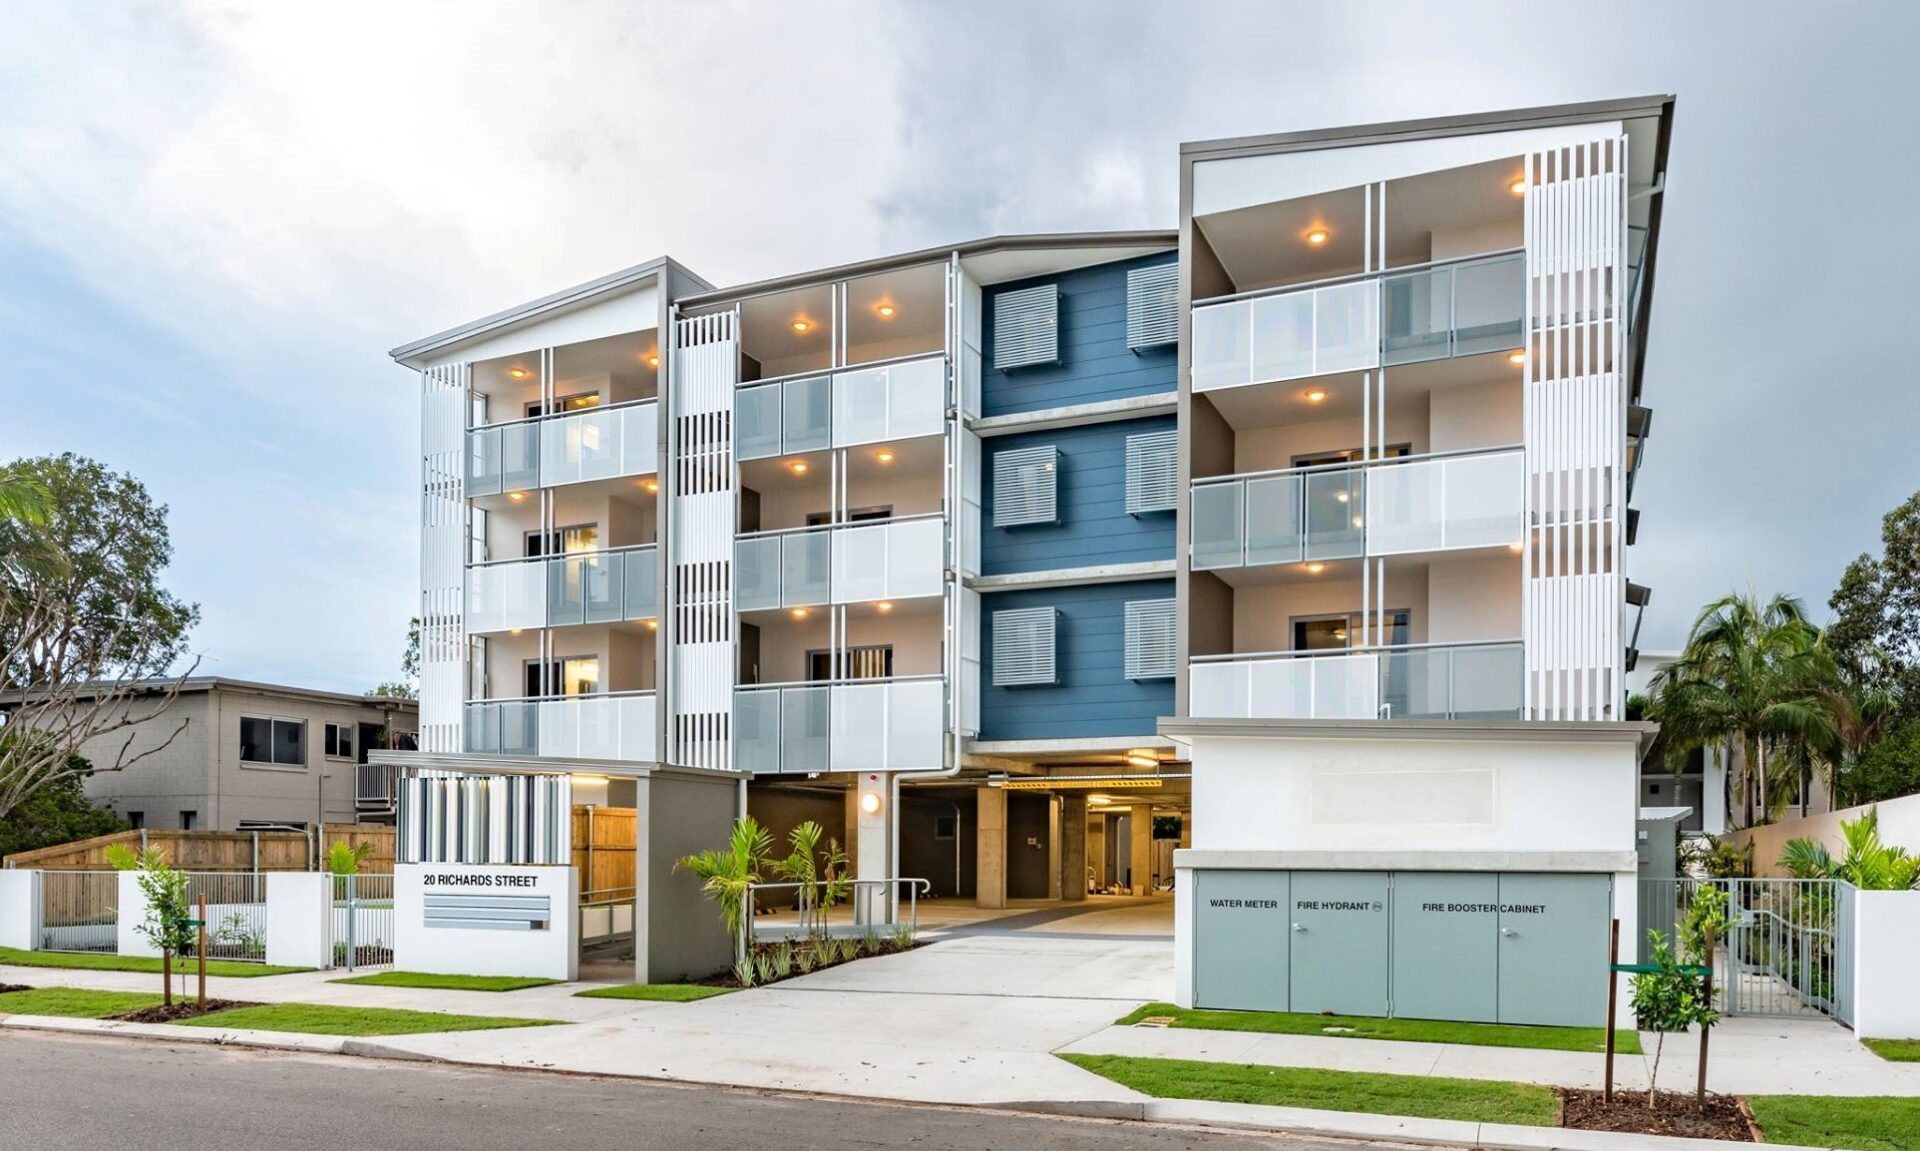 20 Richards Street Multi Residential Architect Cairns Far North Queensland 1